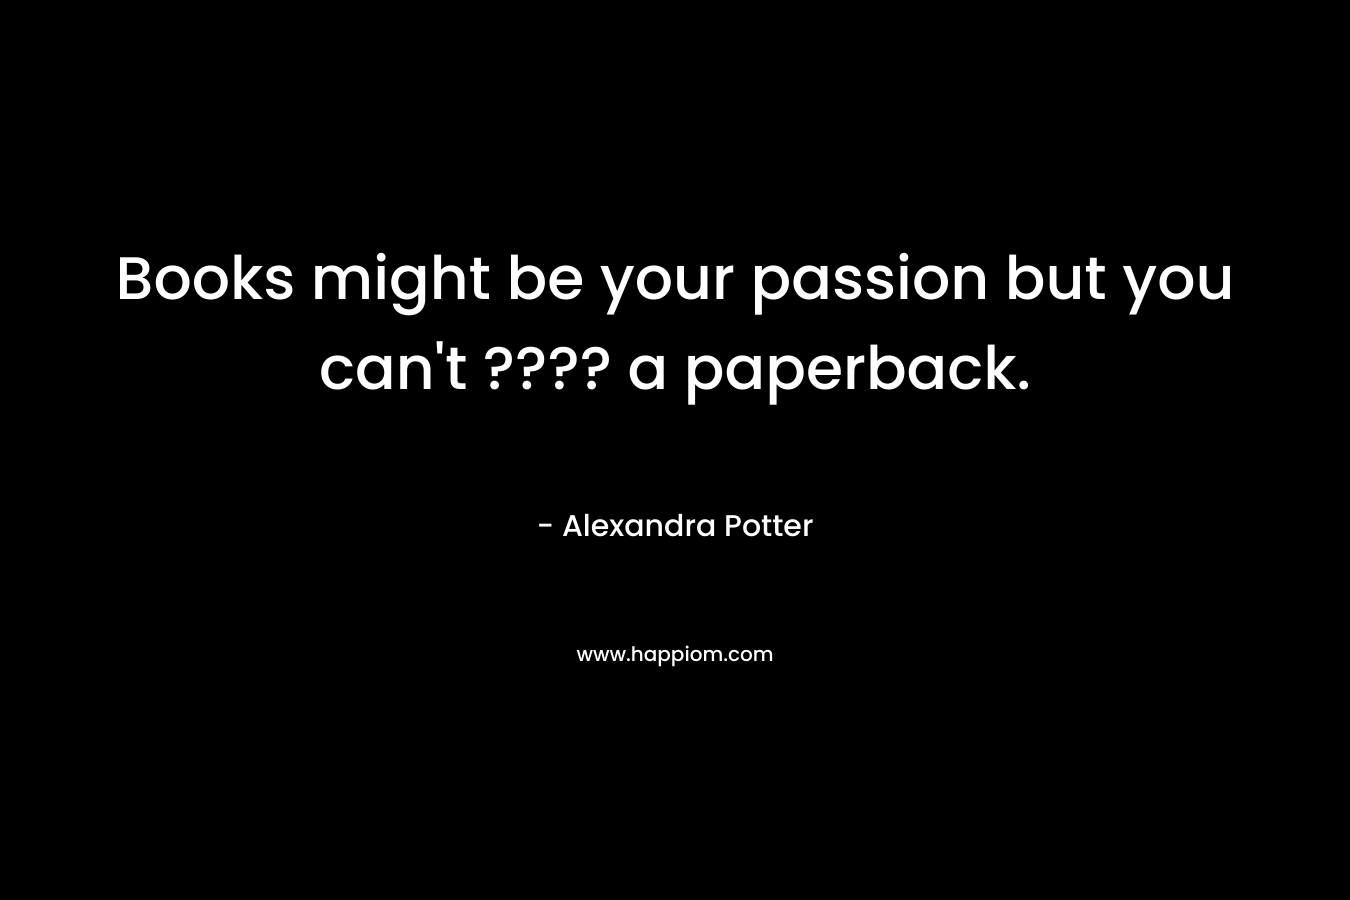 Books might be your passion but you can’t ???? a paperback. – Alexandra Potter